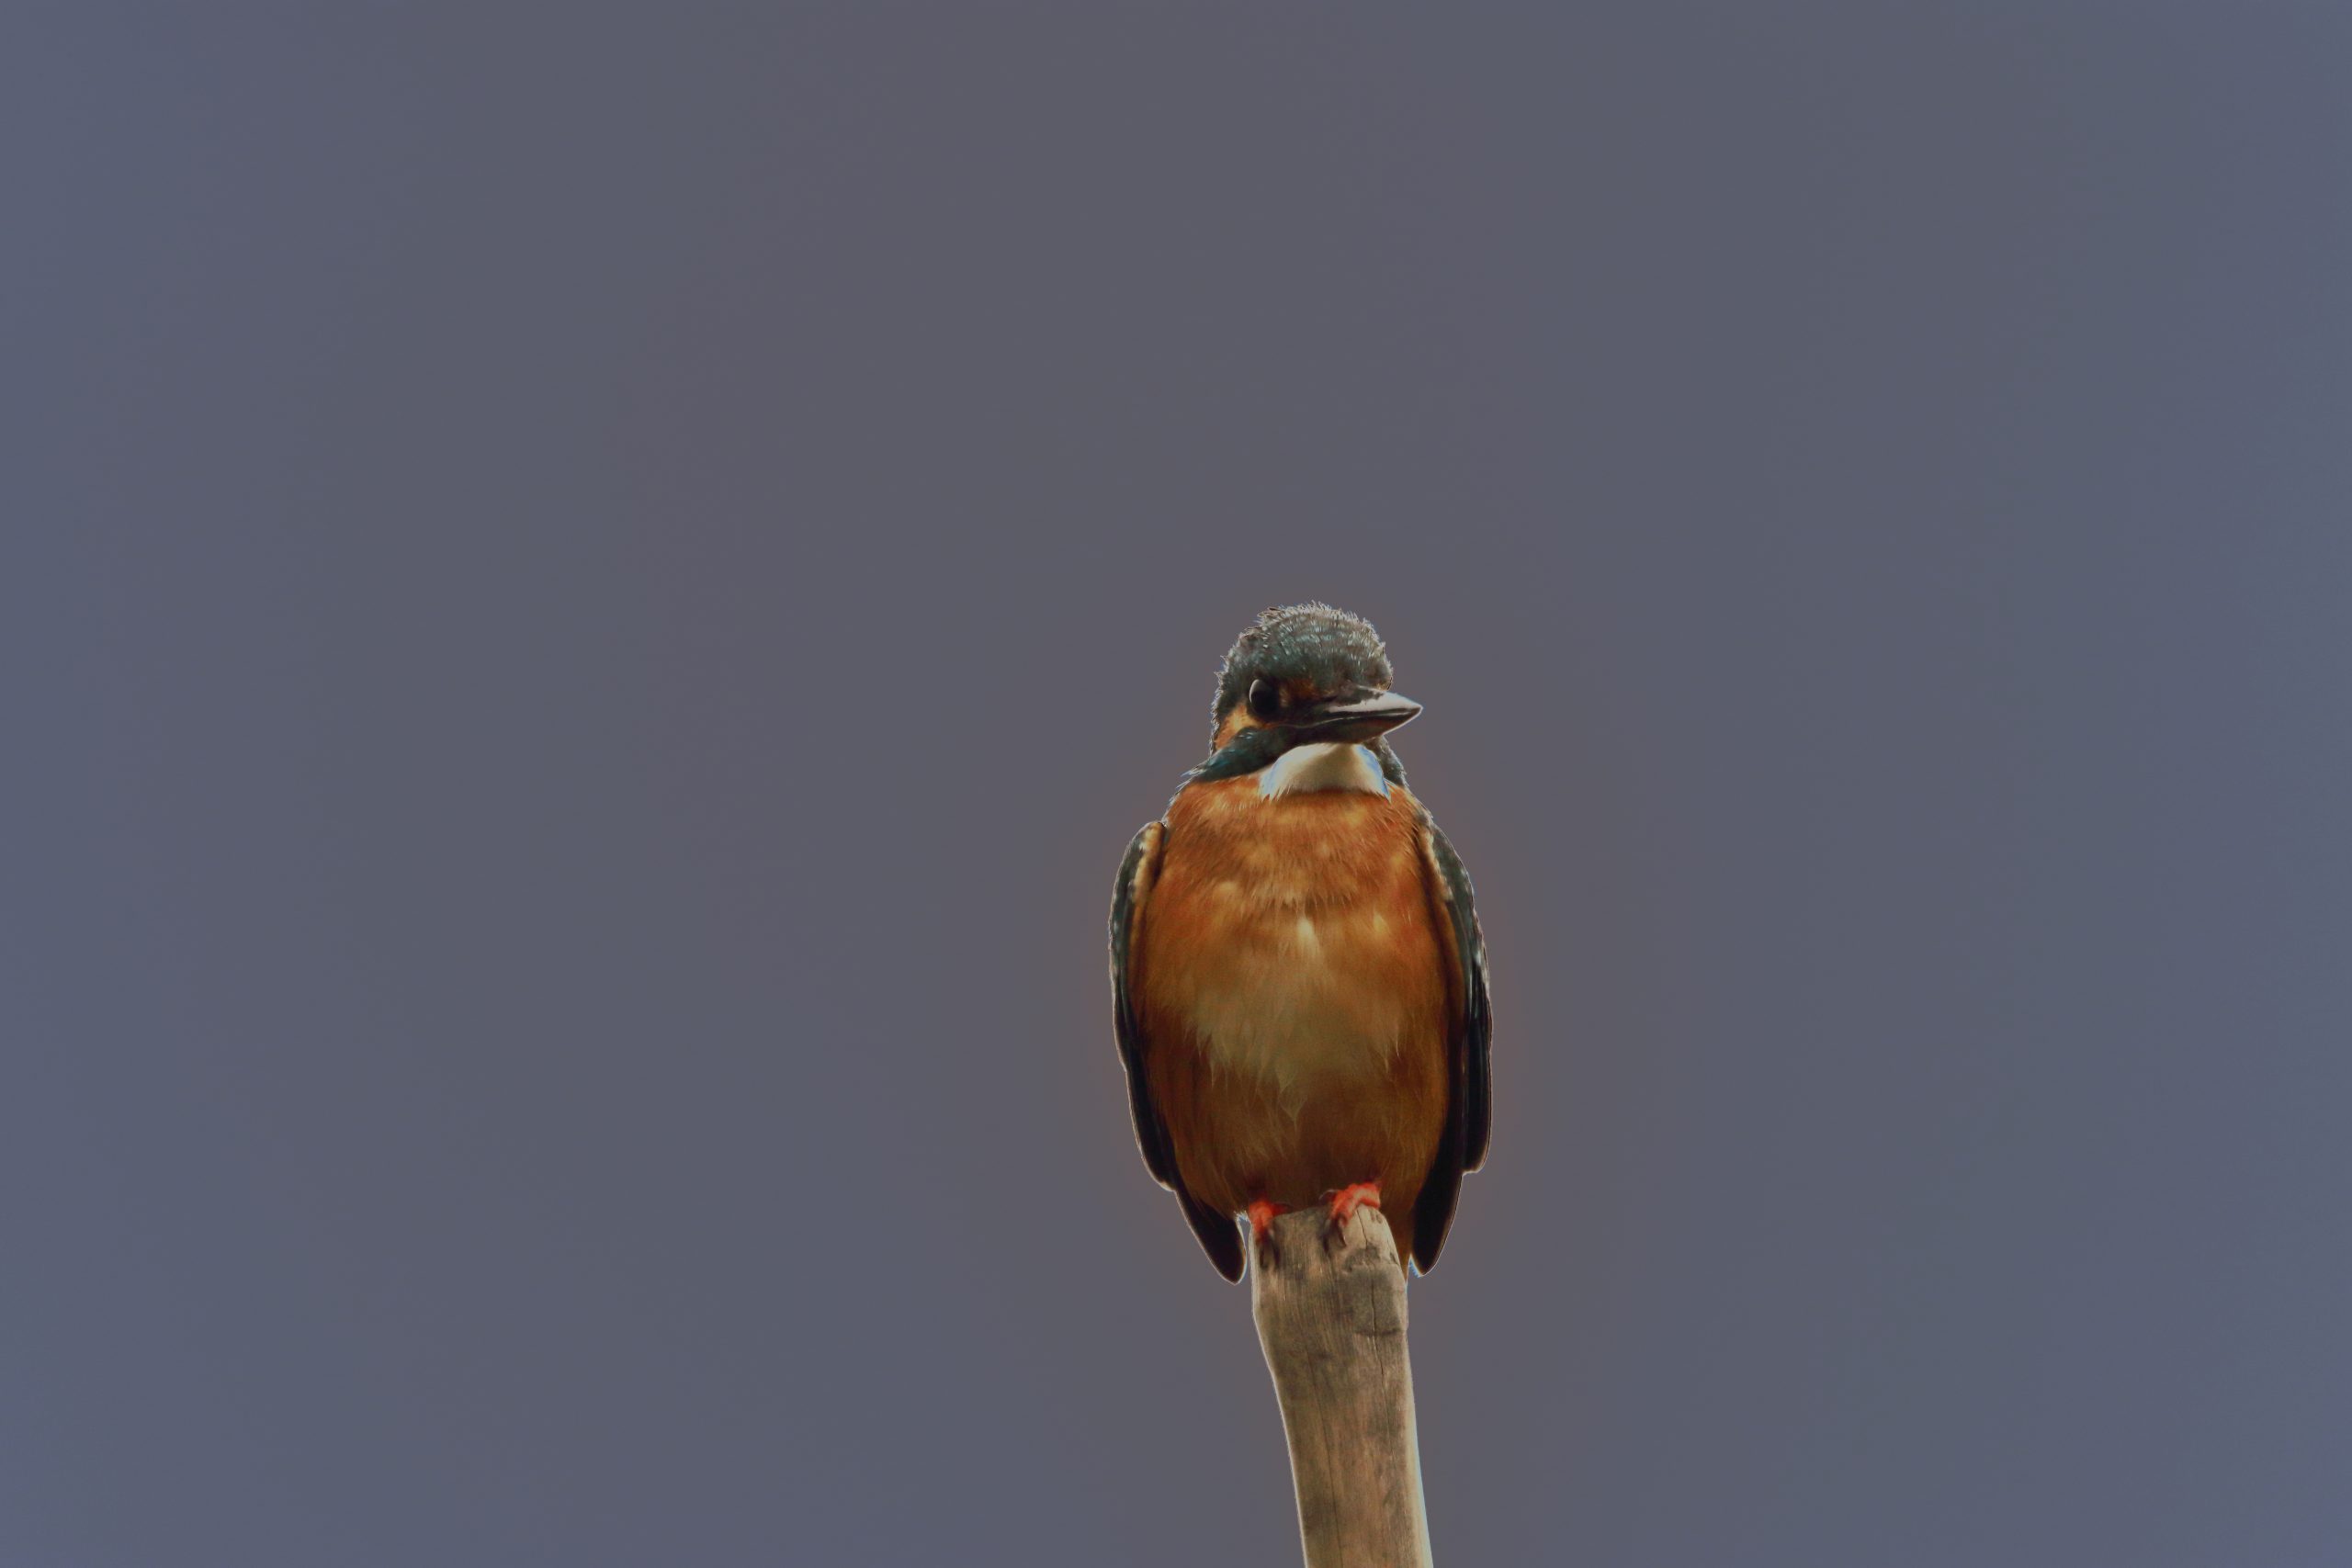 A common Kingfisher sitting on a twig.